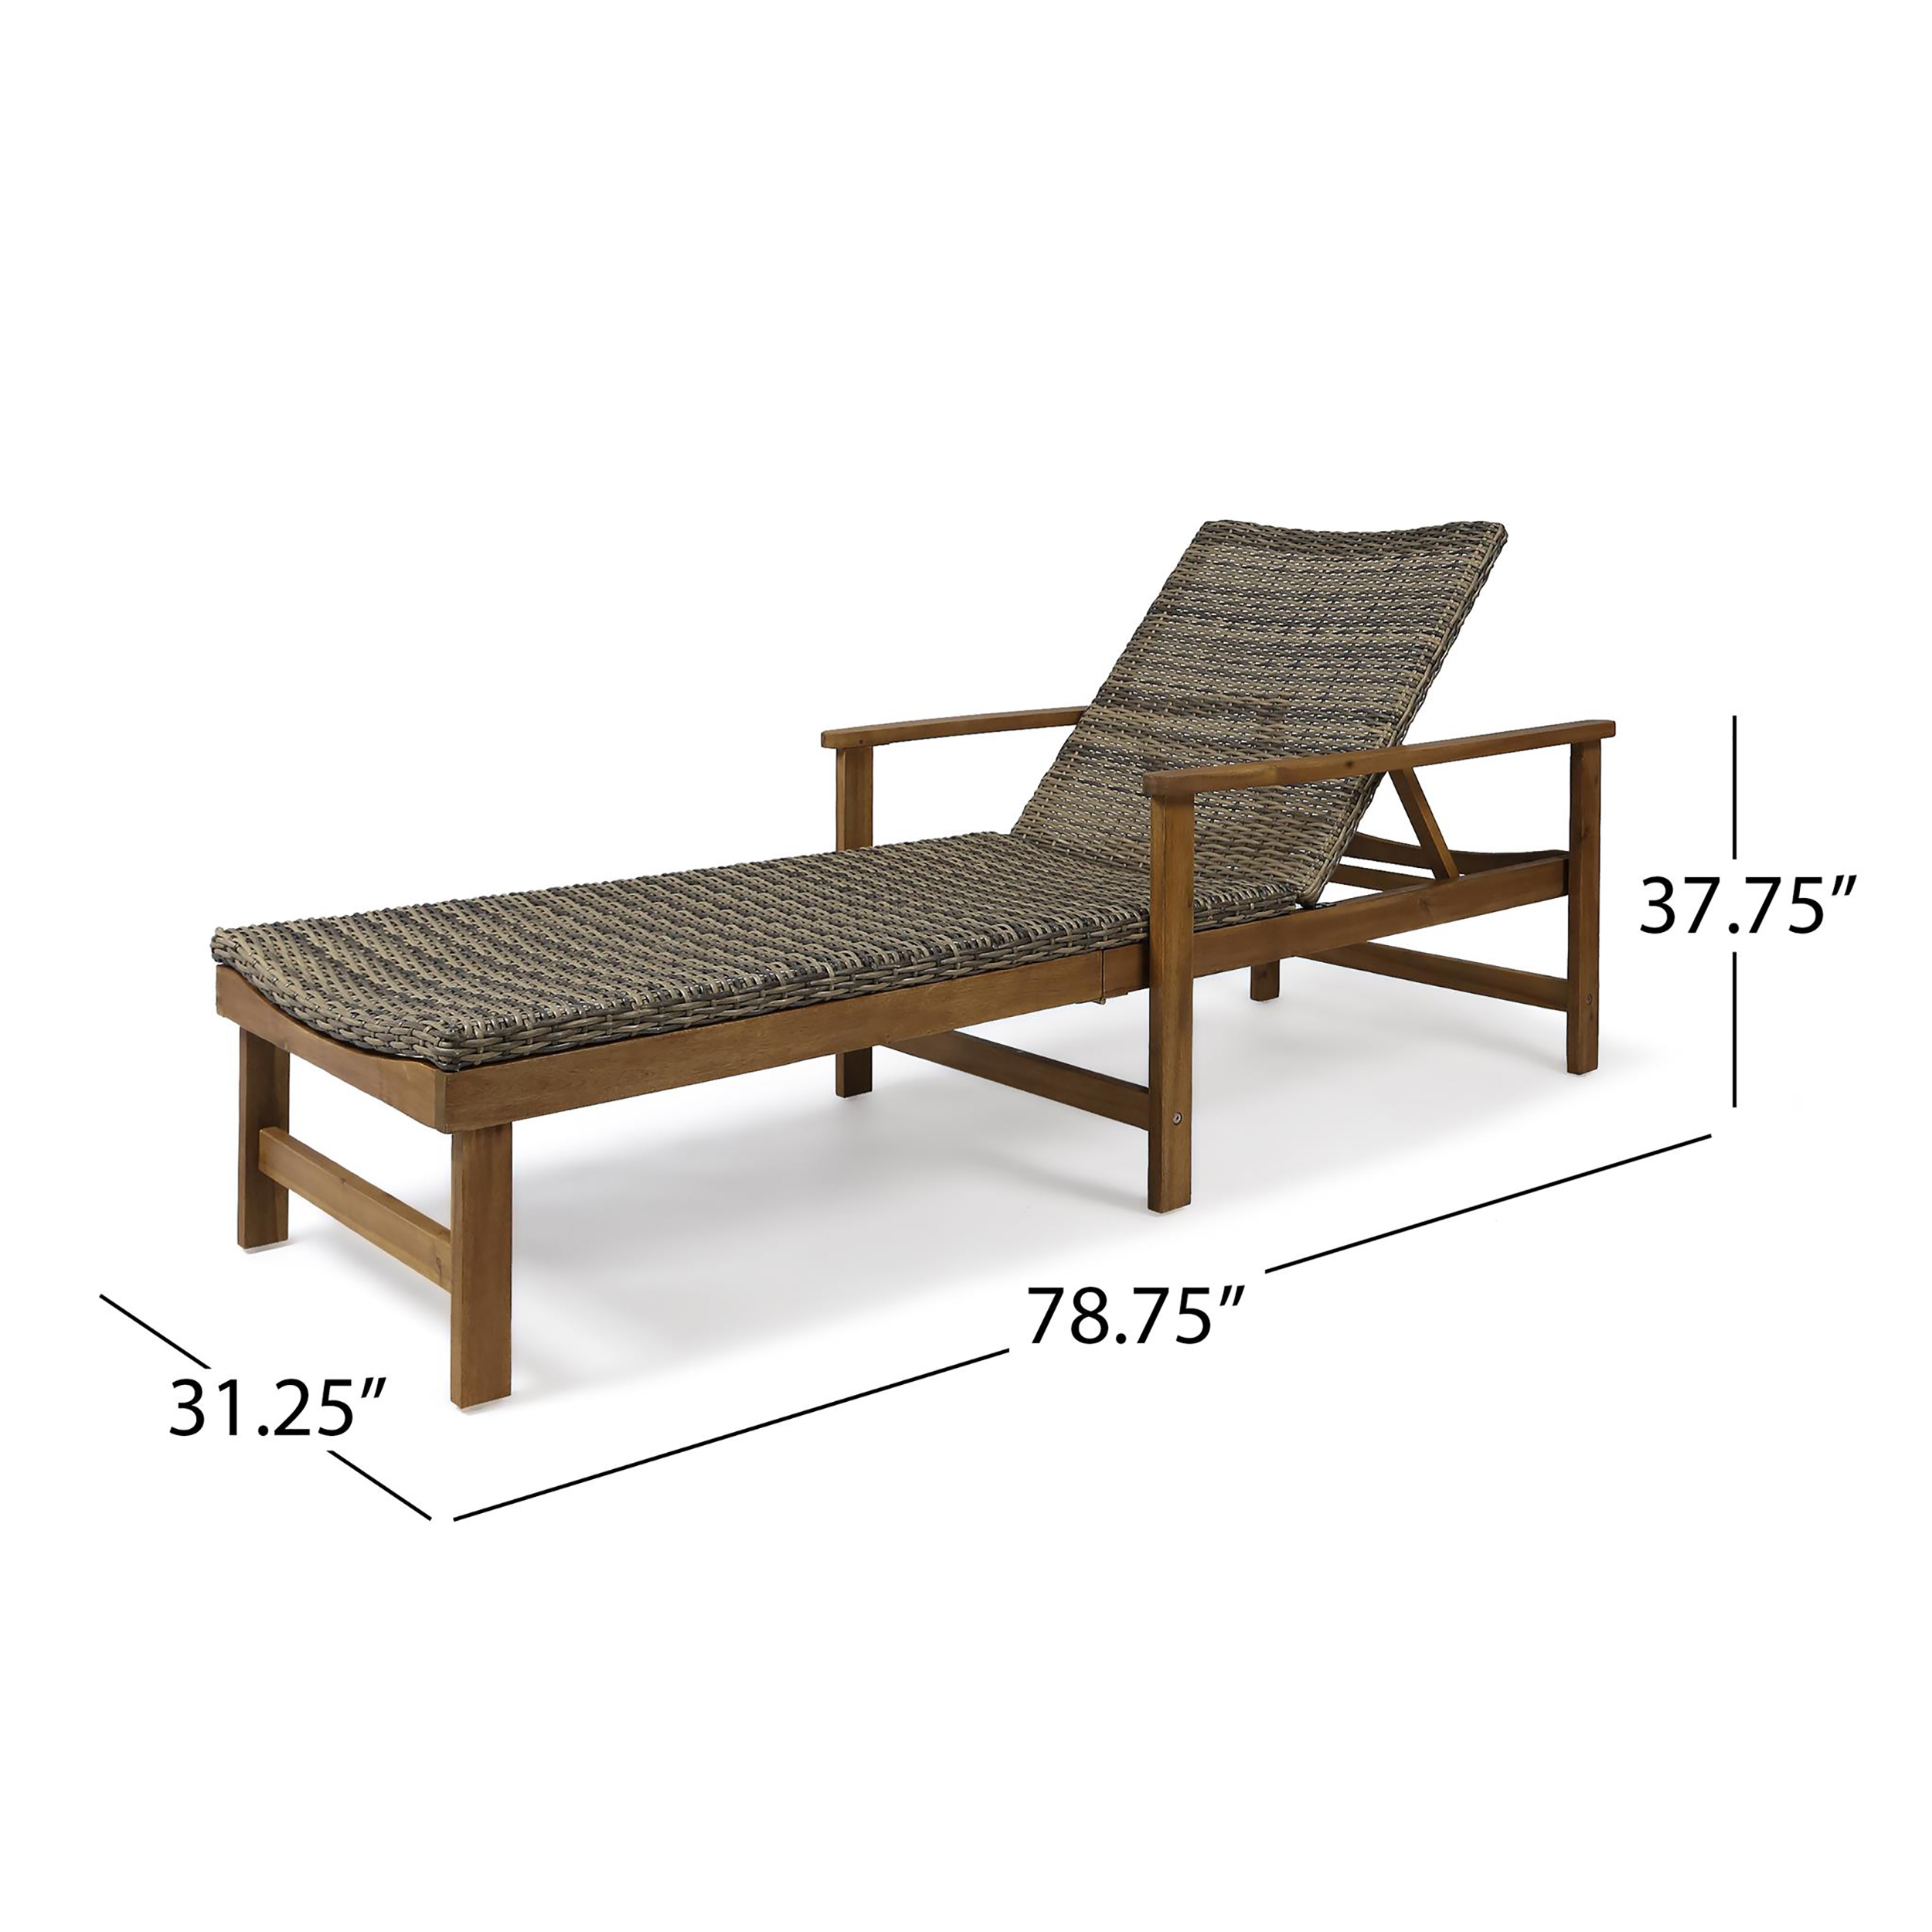 Camdyn Outdoor Rustic Acacia Wood Chaise Lounge with Wicker Seating (Set of 2), Natural and Gray - image 5 of 6